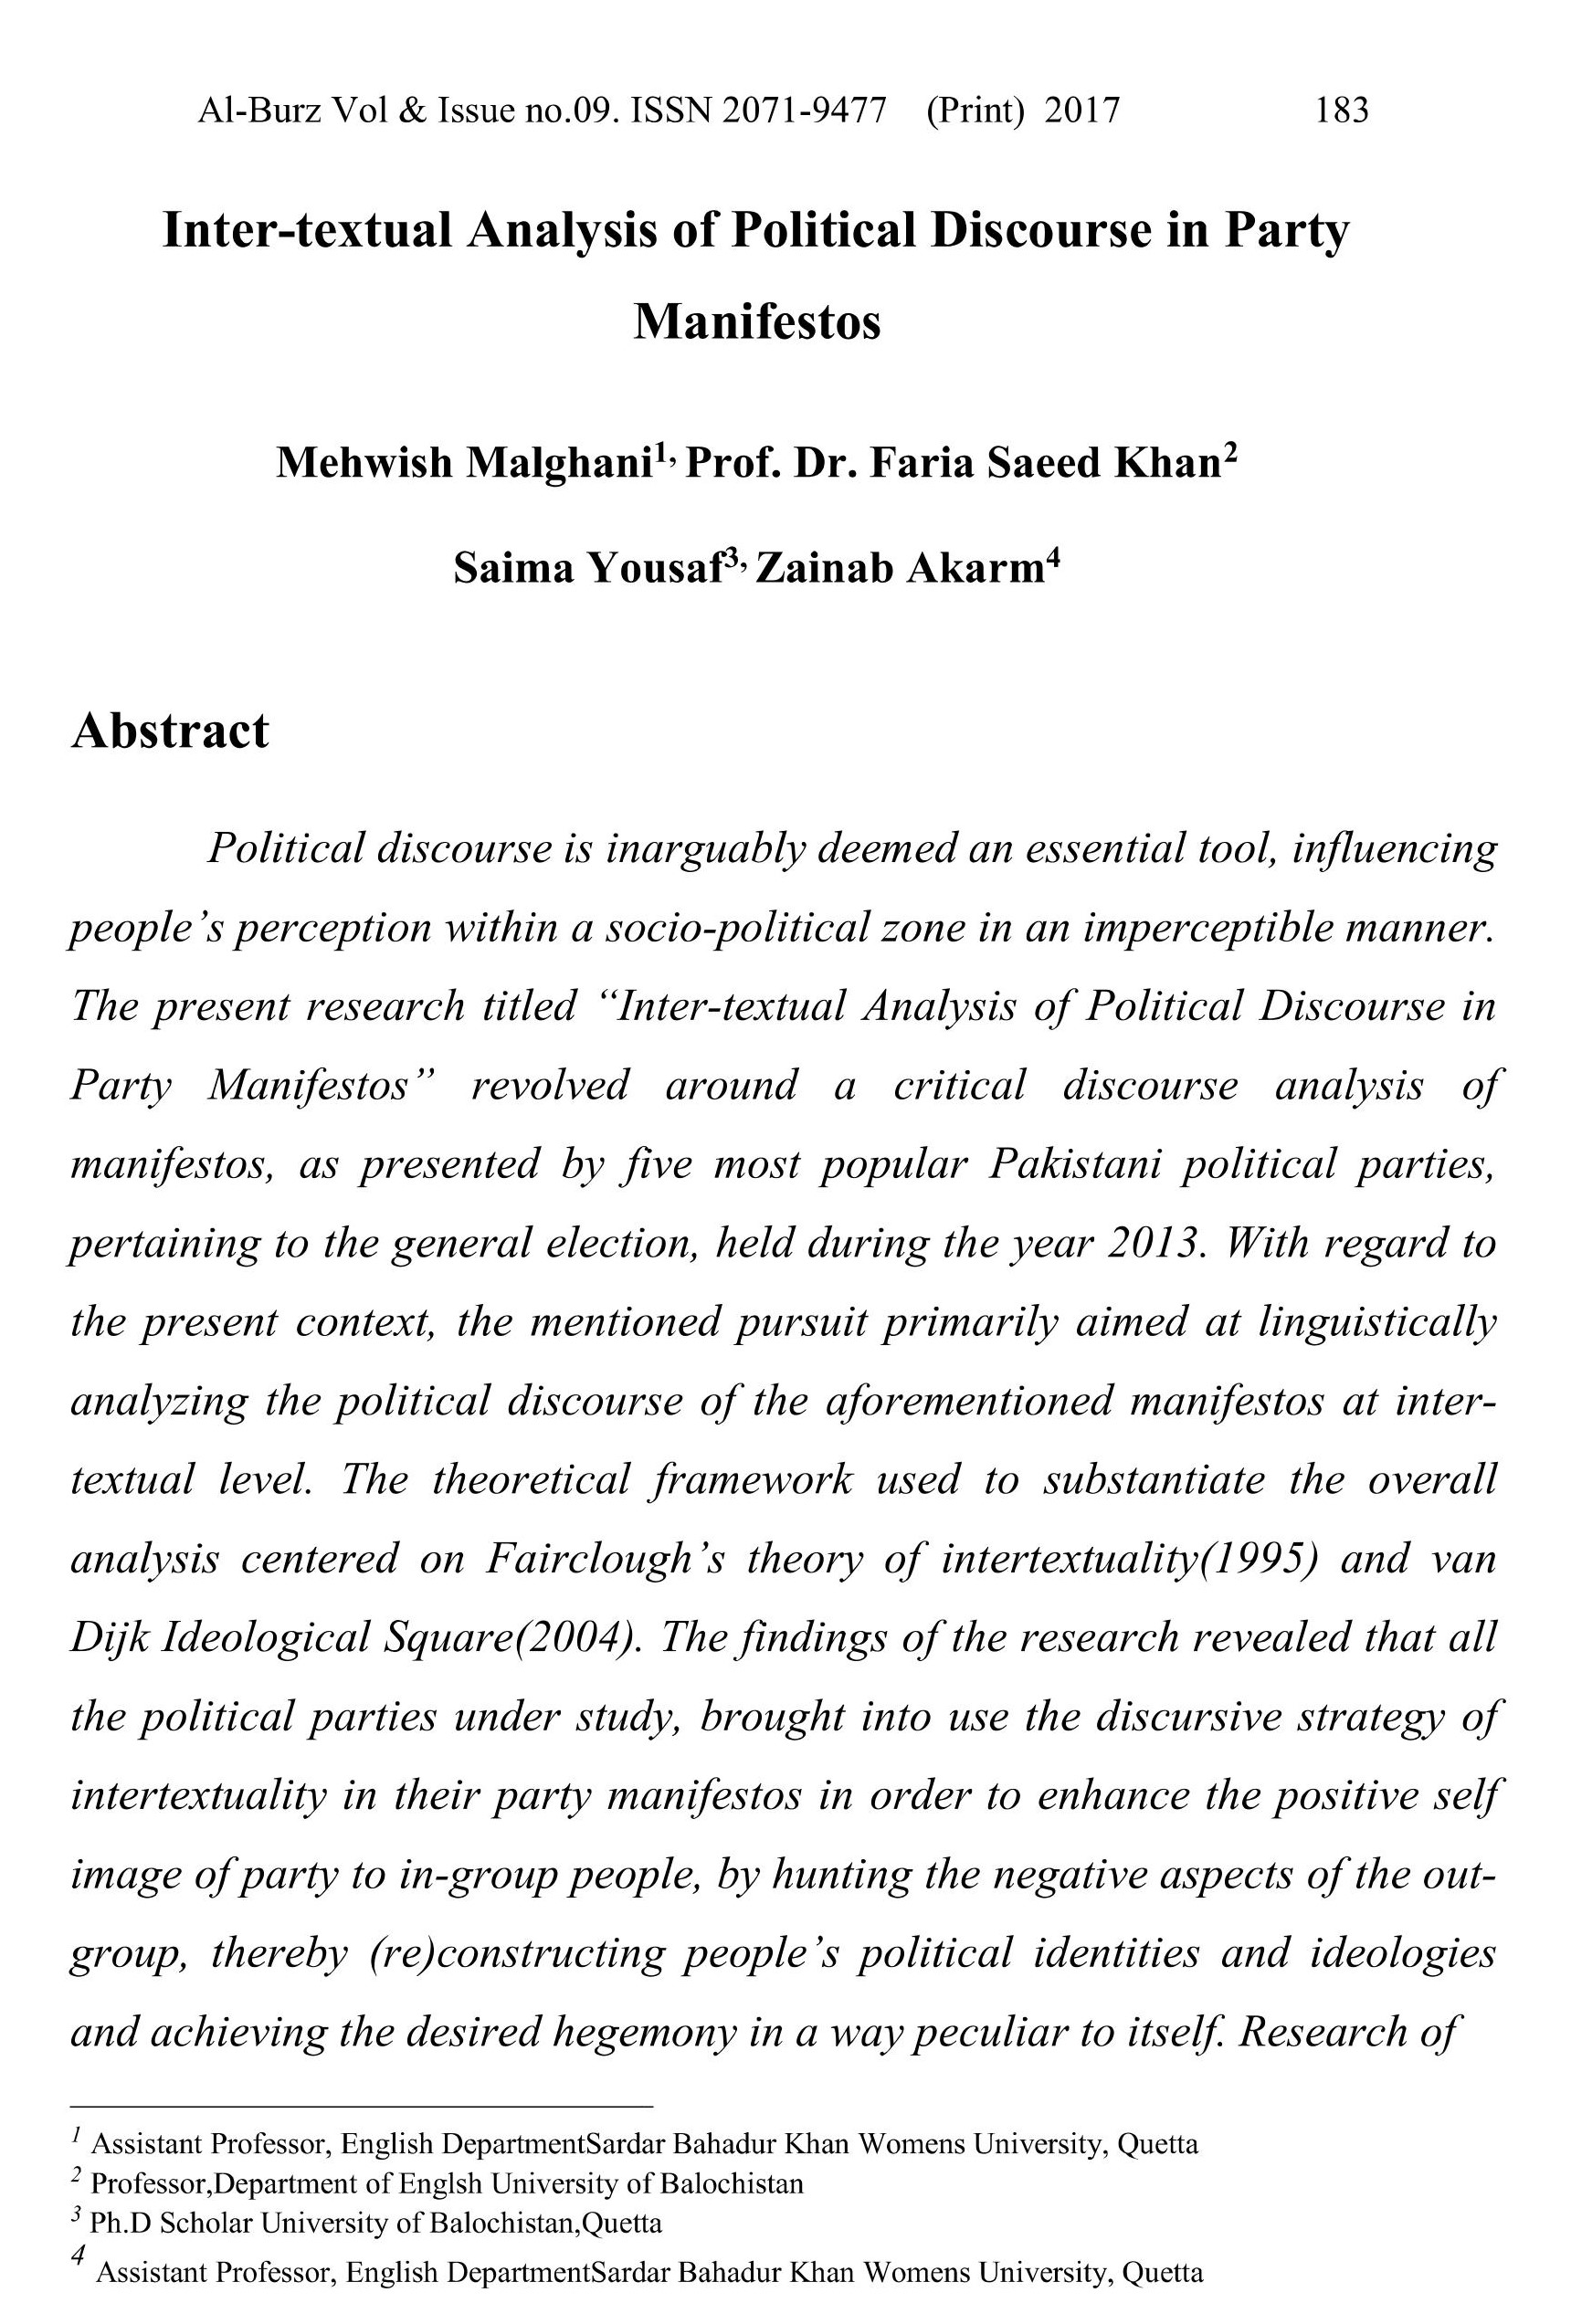 Inter-textual Analysis of Political Discourse in Party Manifestos